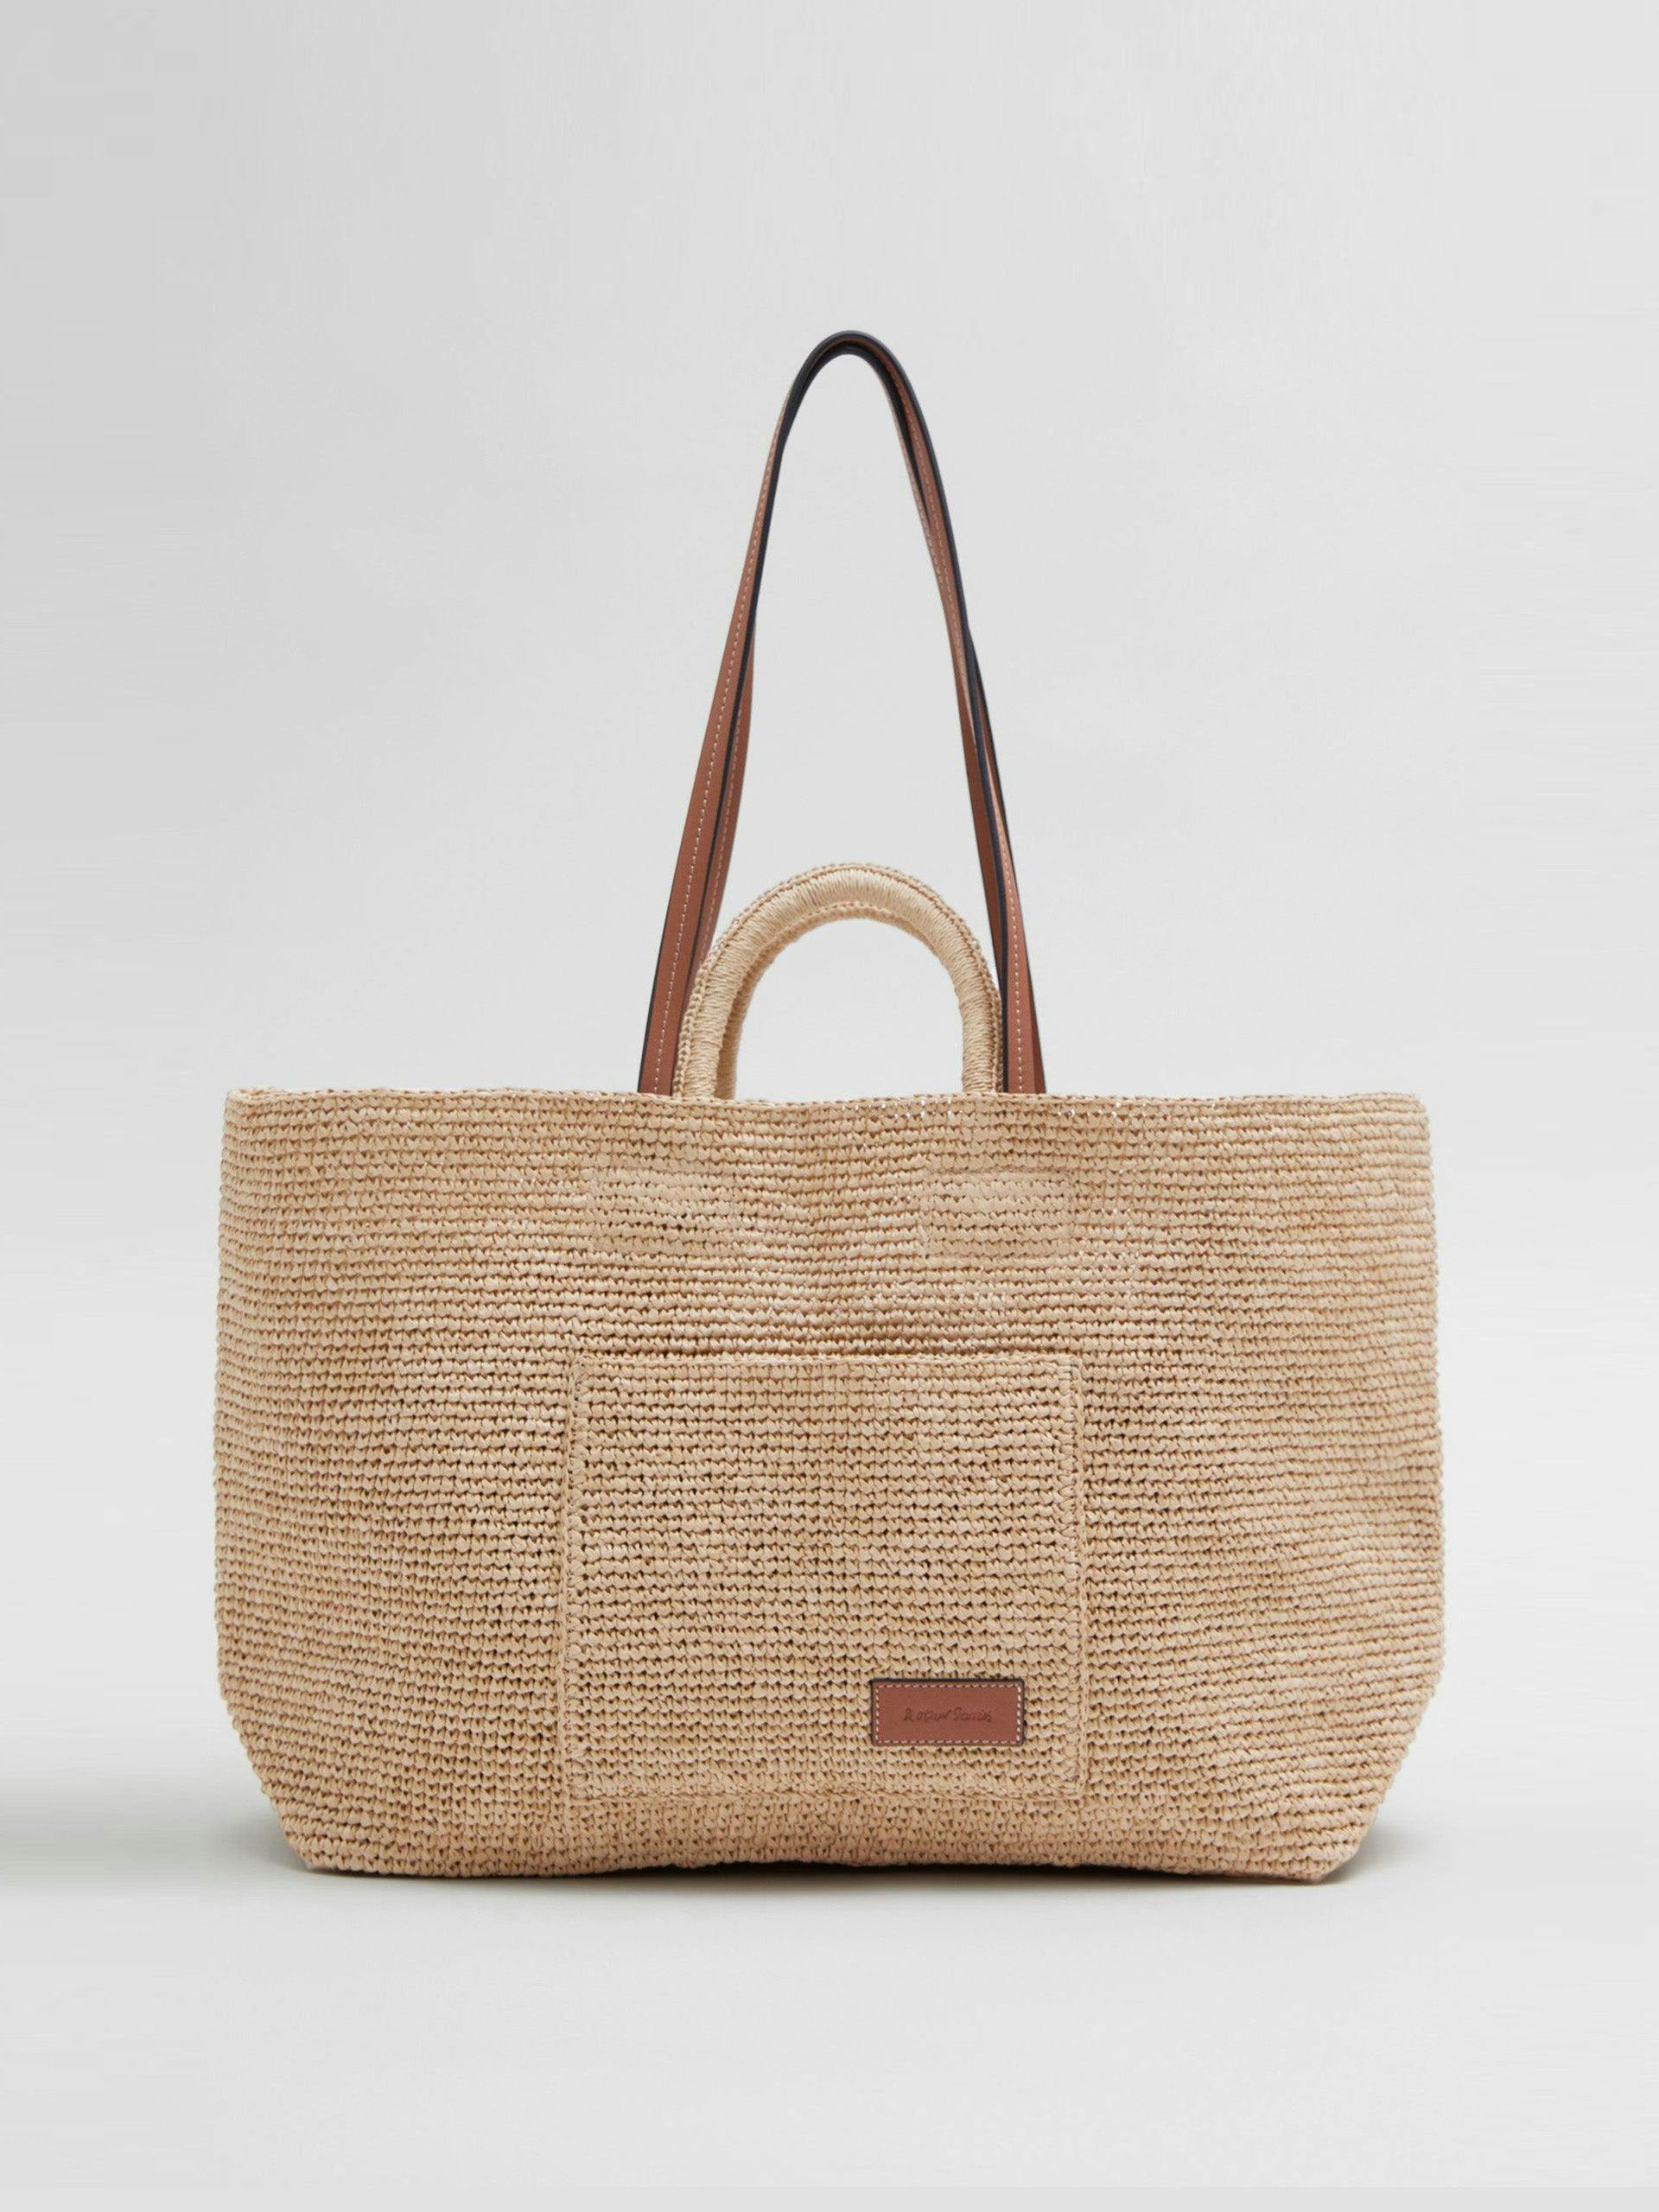 Large woven straw tote bag